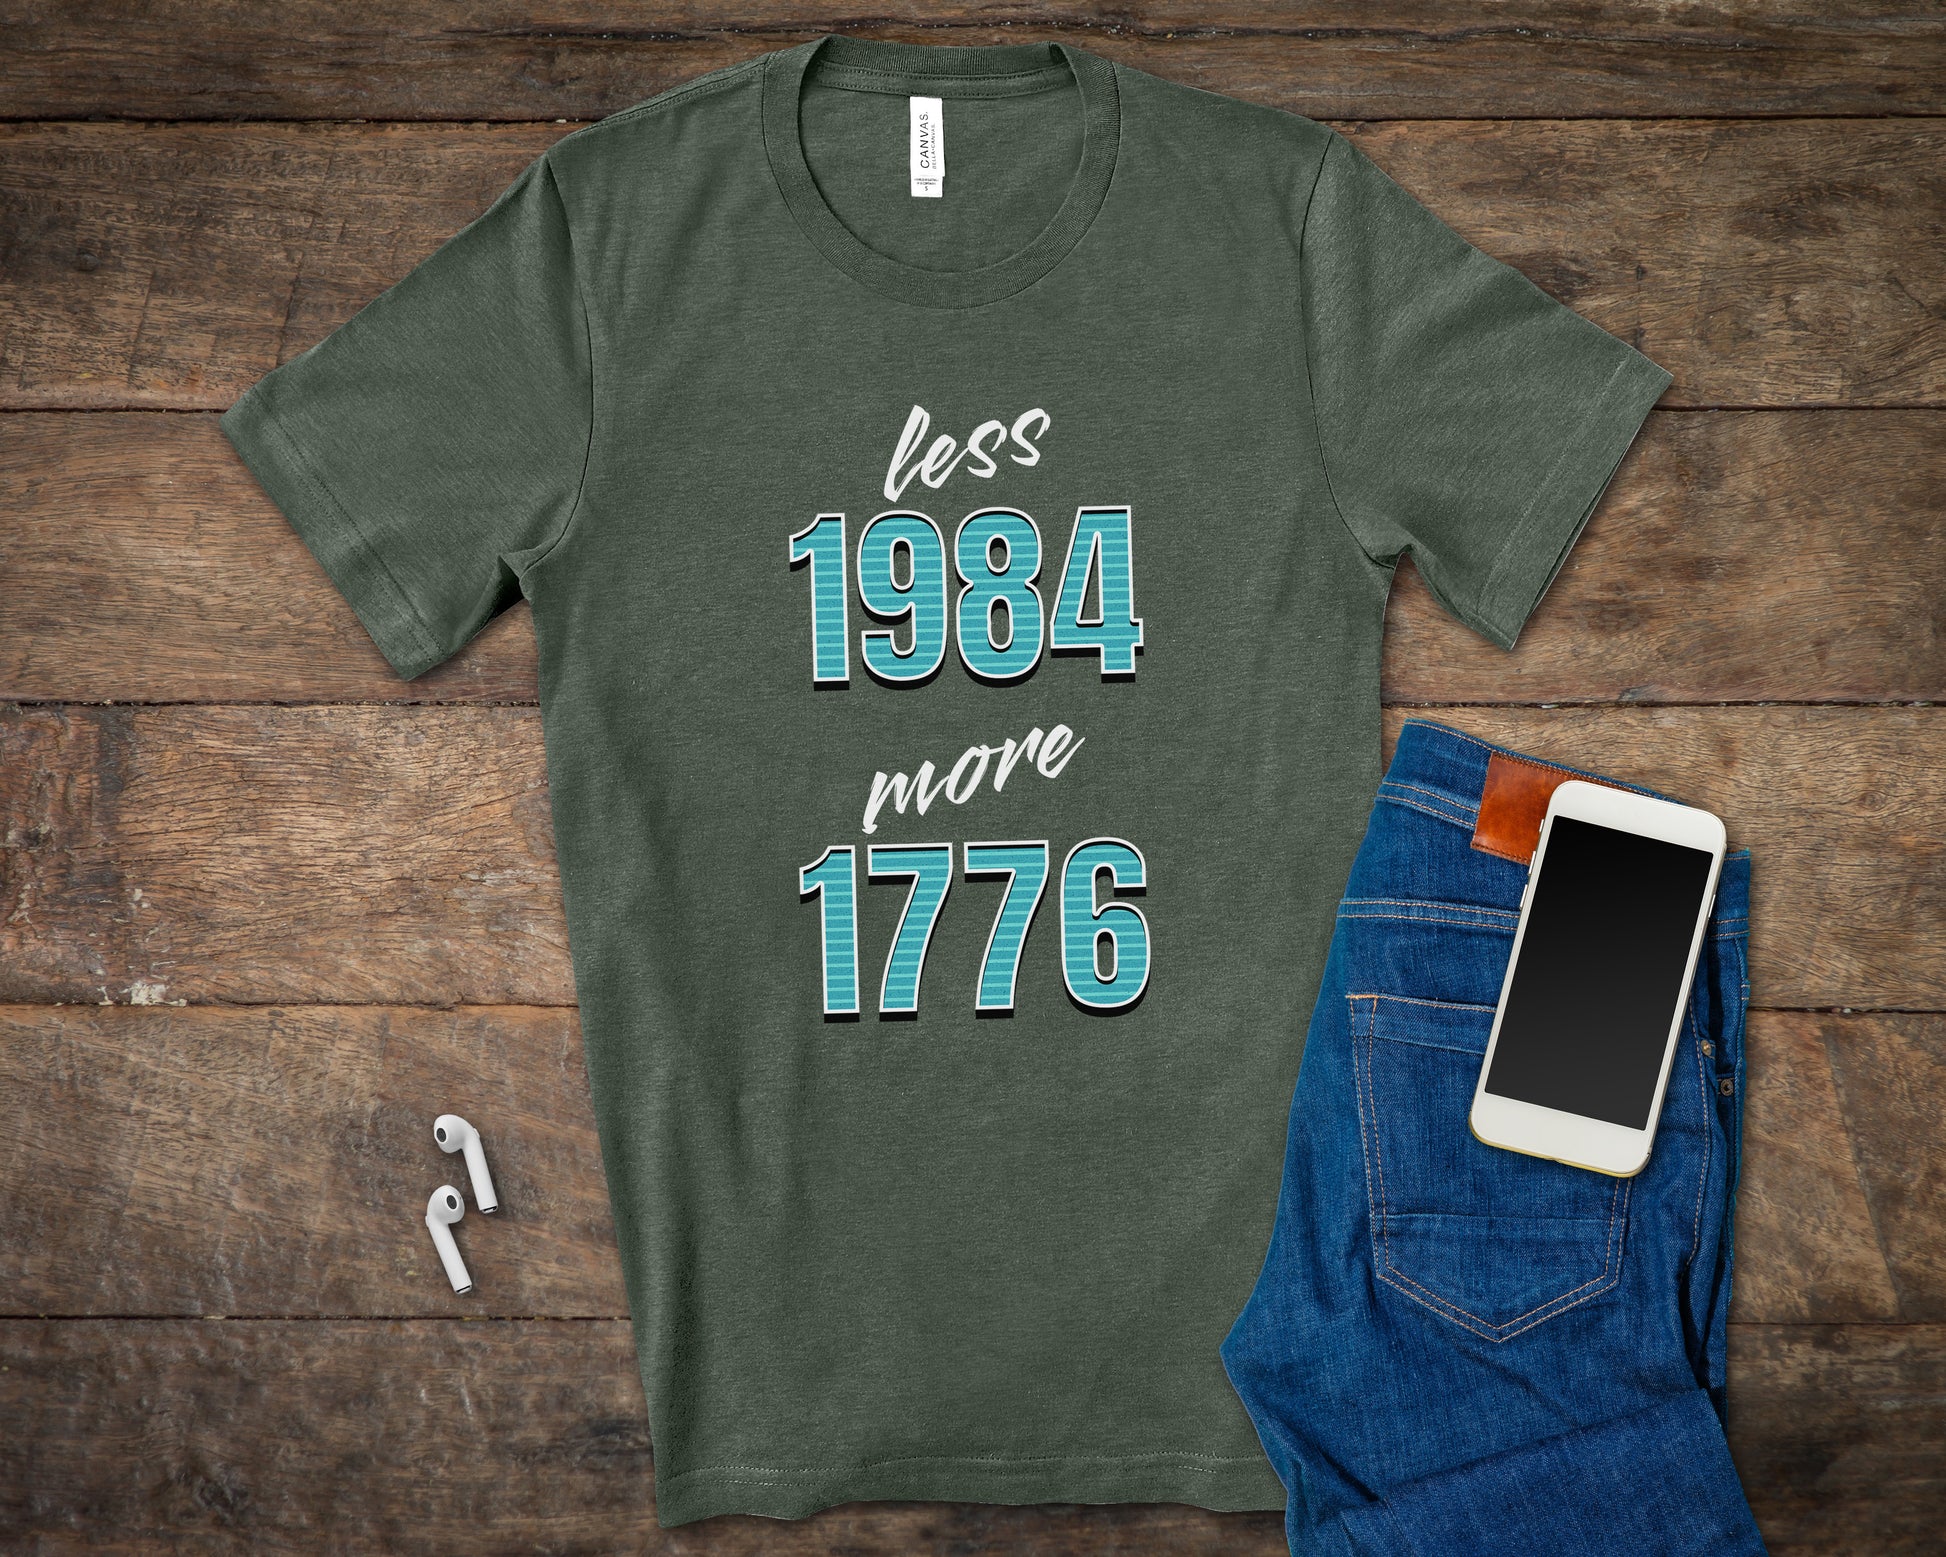 Less 1984 More 1776 Conservative T-shirt for lovers of American Values-T-Shirts-PureDesignTees